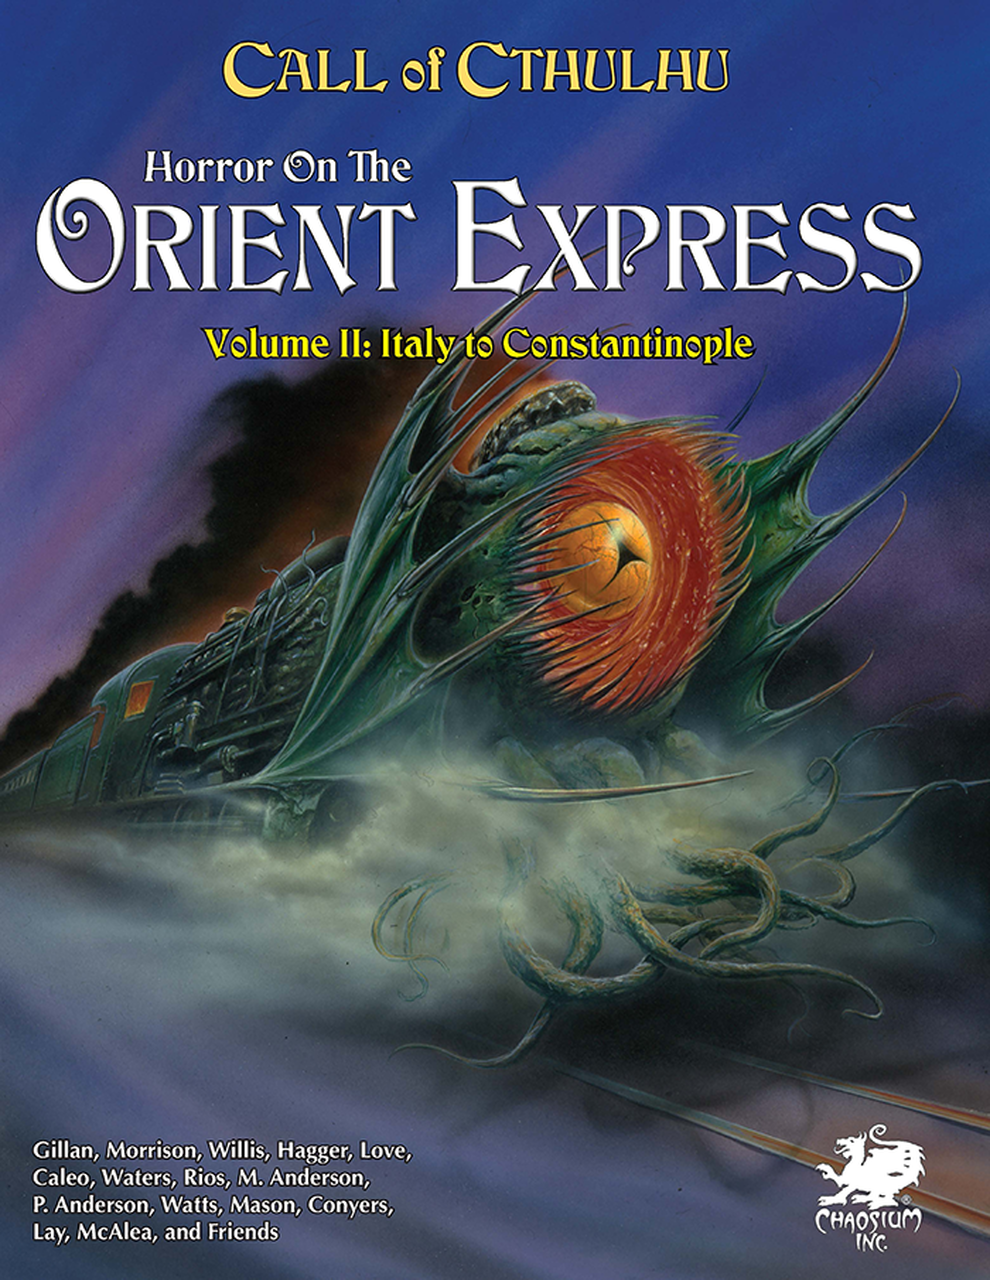 Horror on the Orient Express - 2 Volume Set